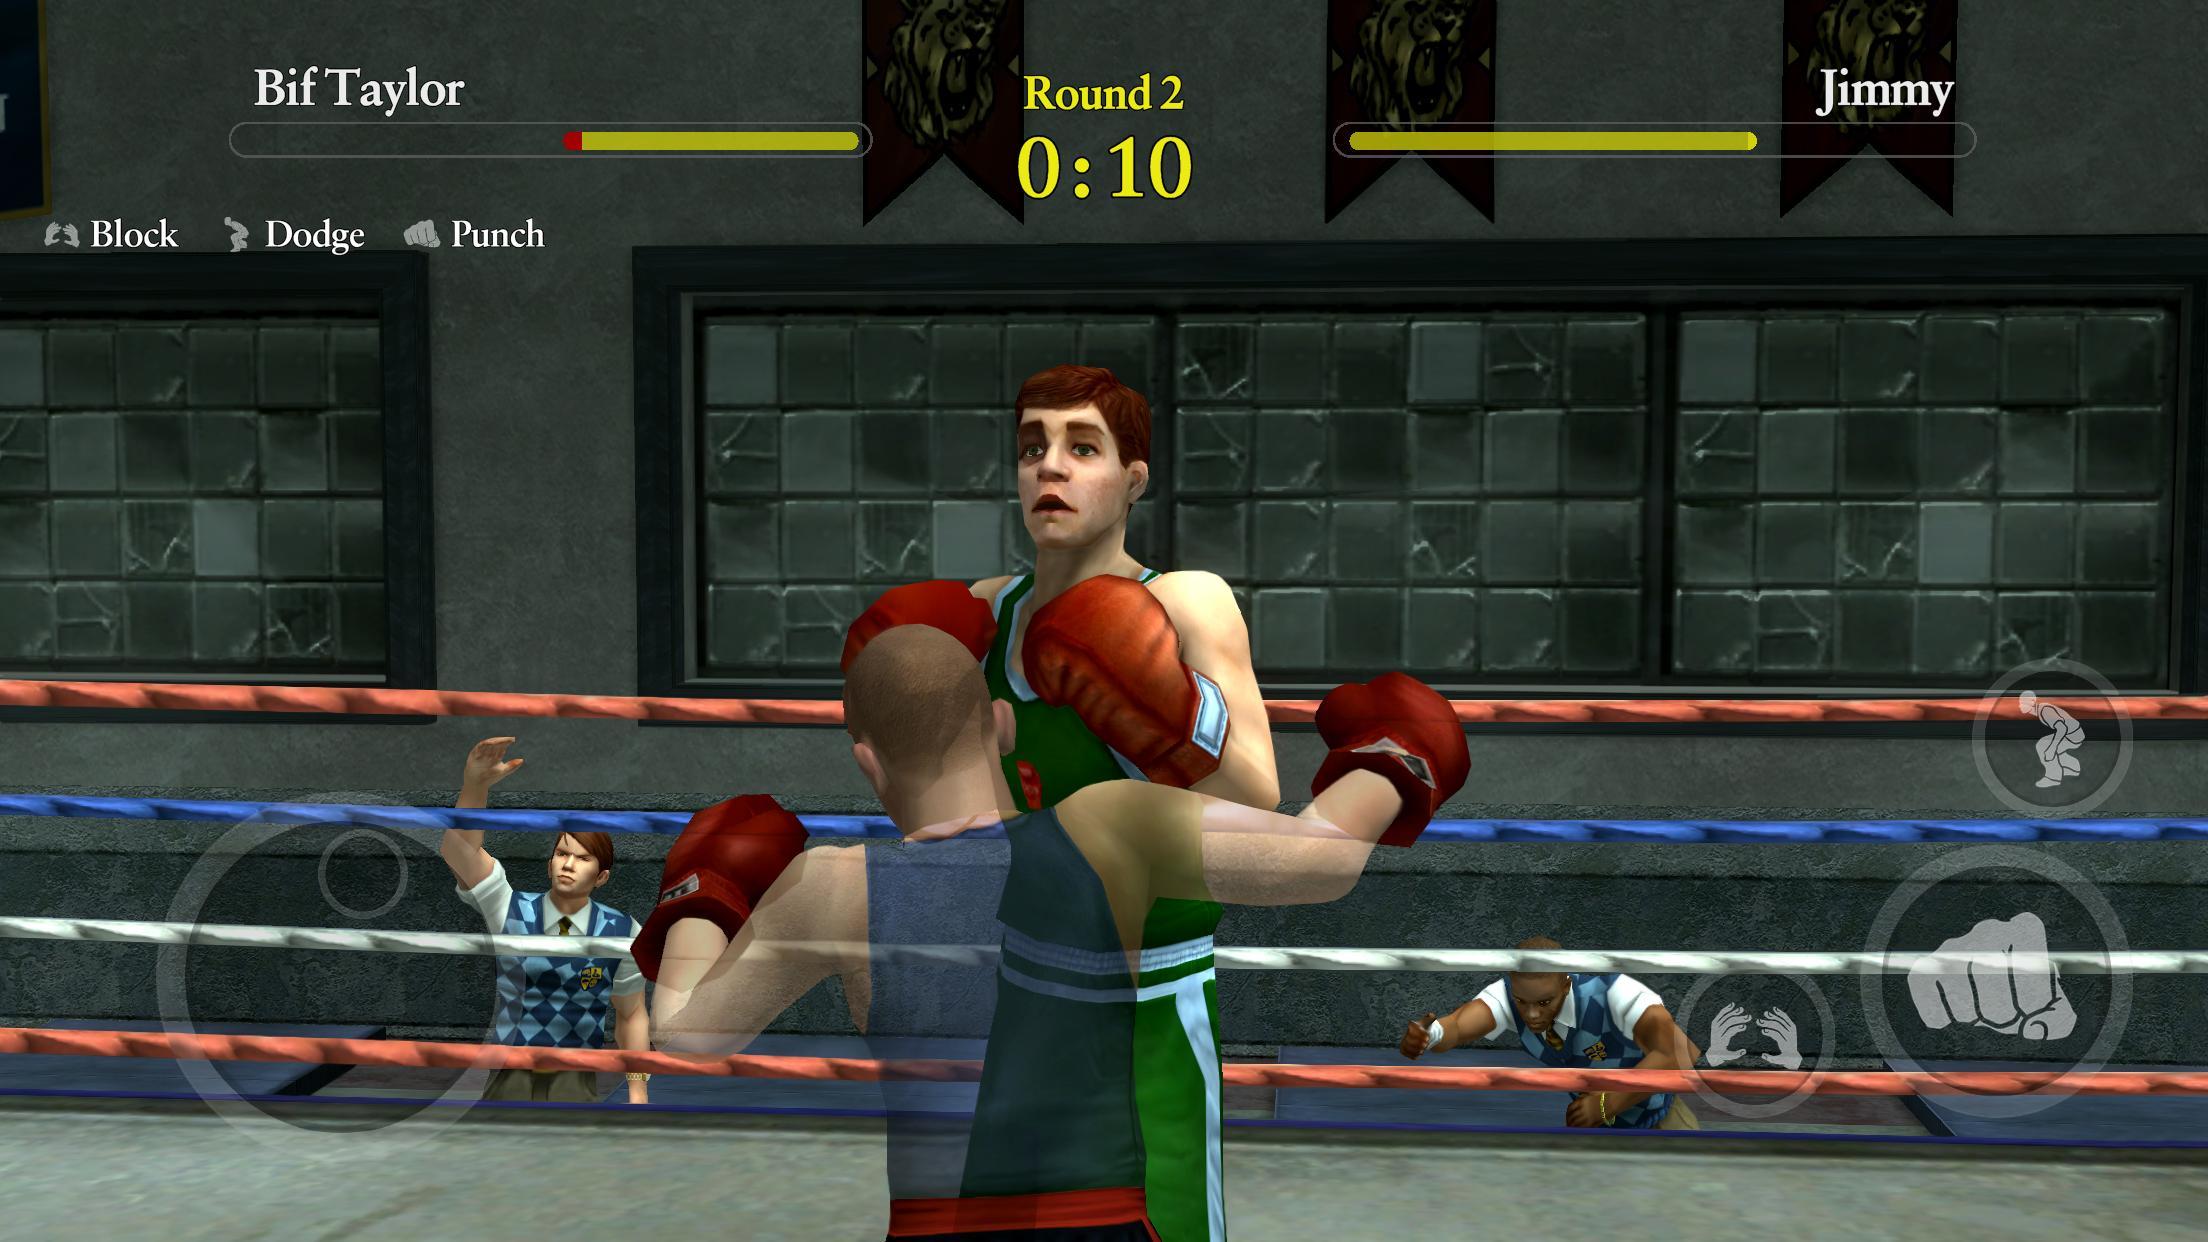 Bully Punch - APK Download for Android